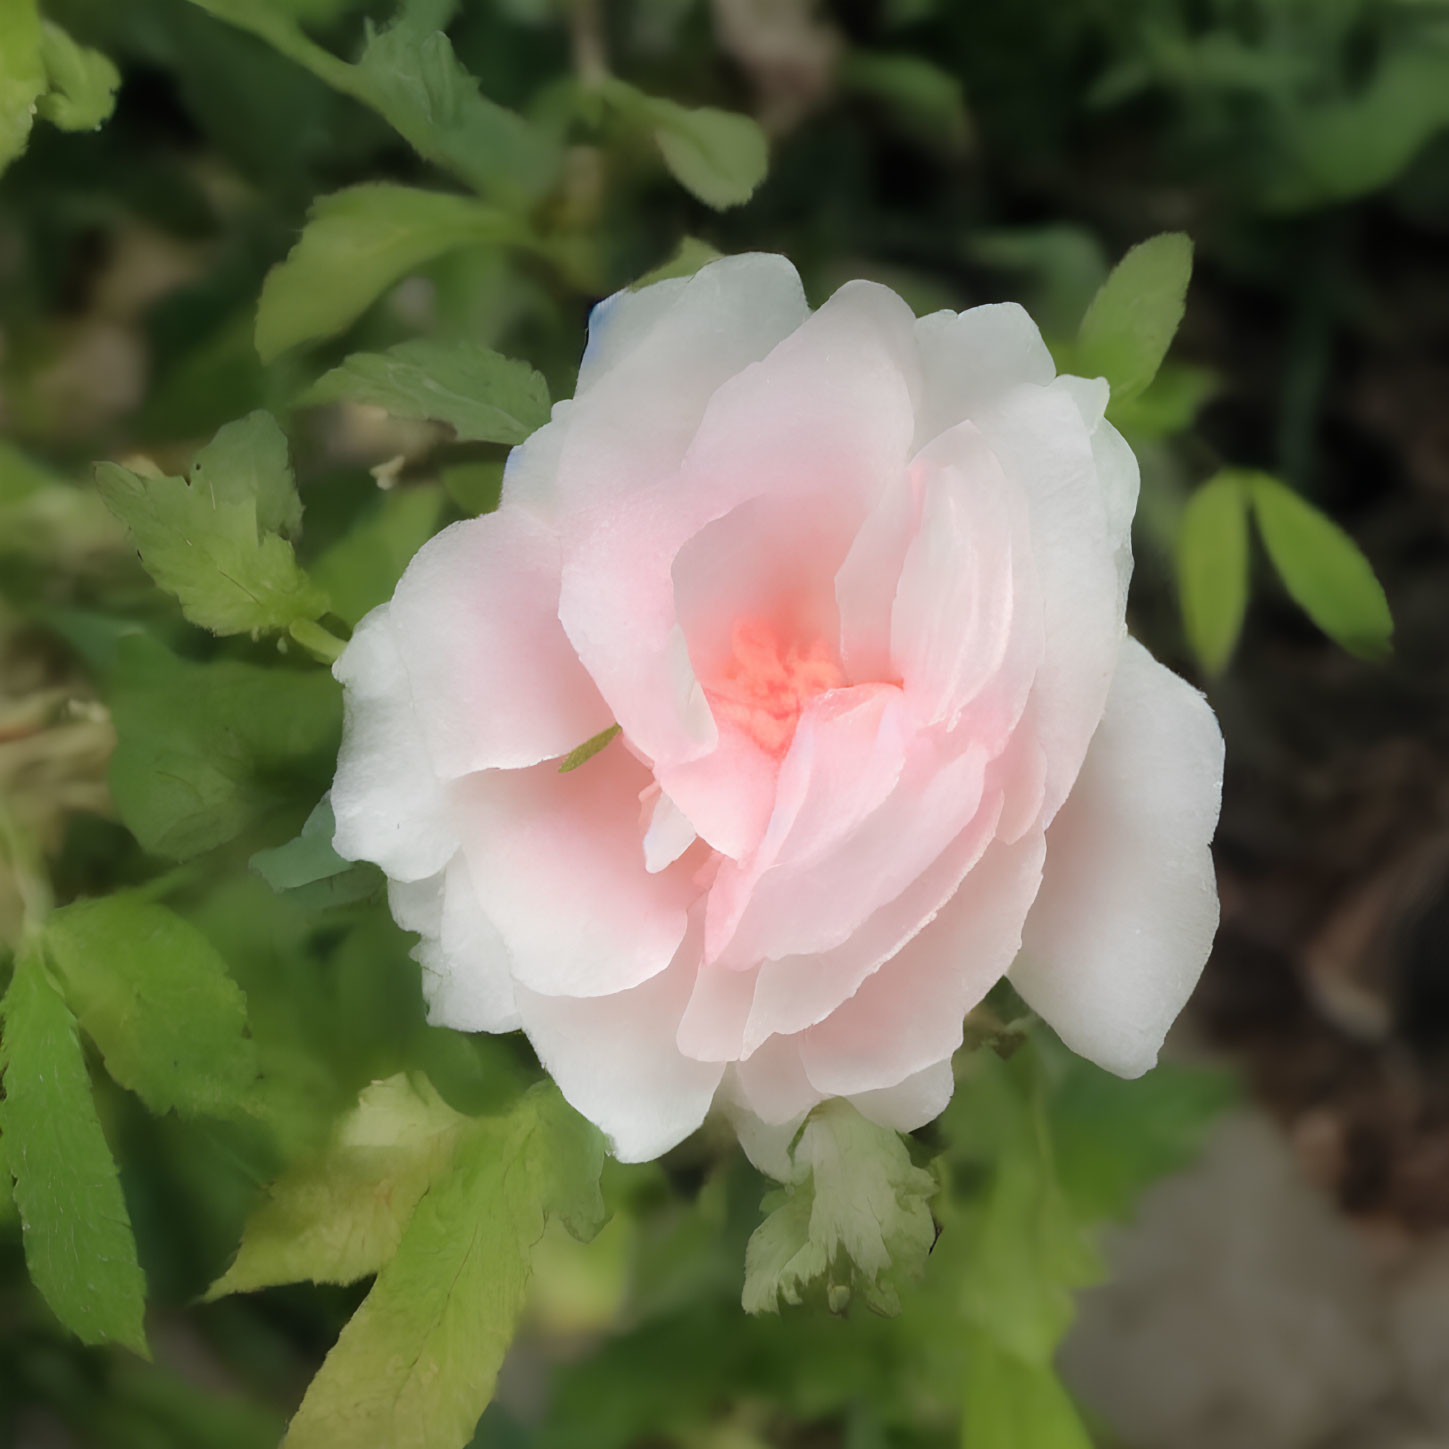 Pink rose in bloom with soft petals and gradient colors among green foliage